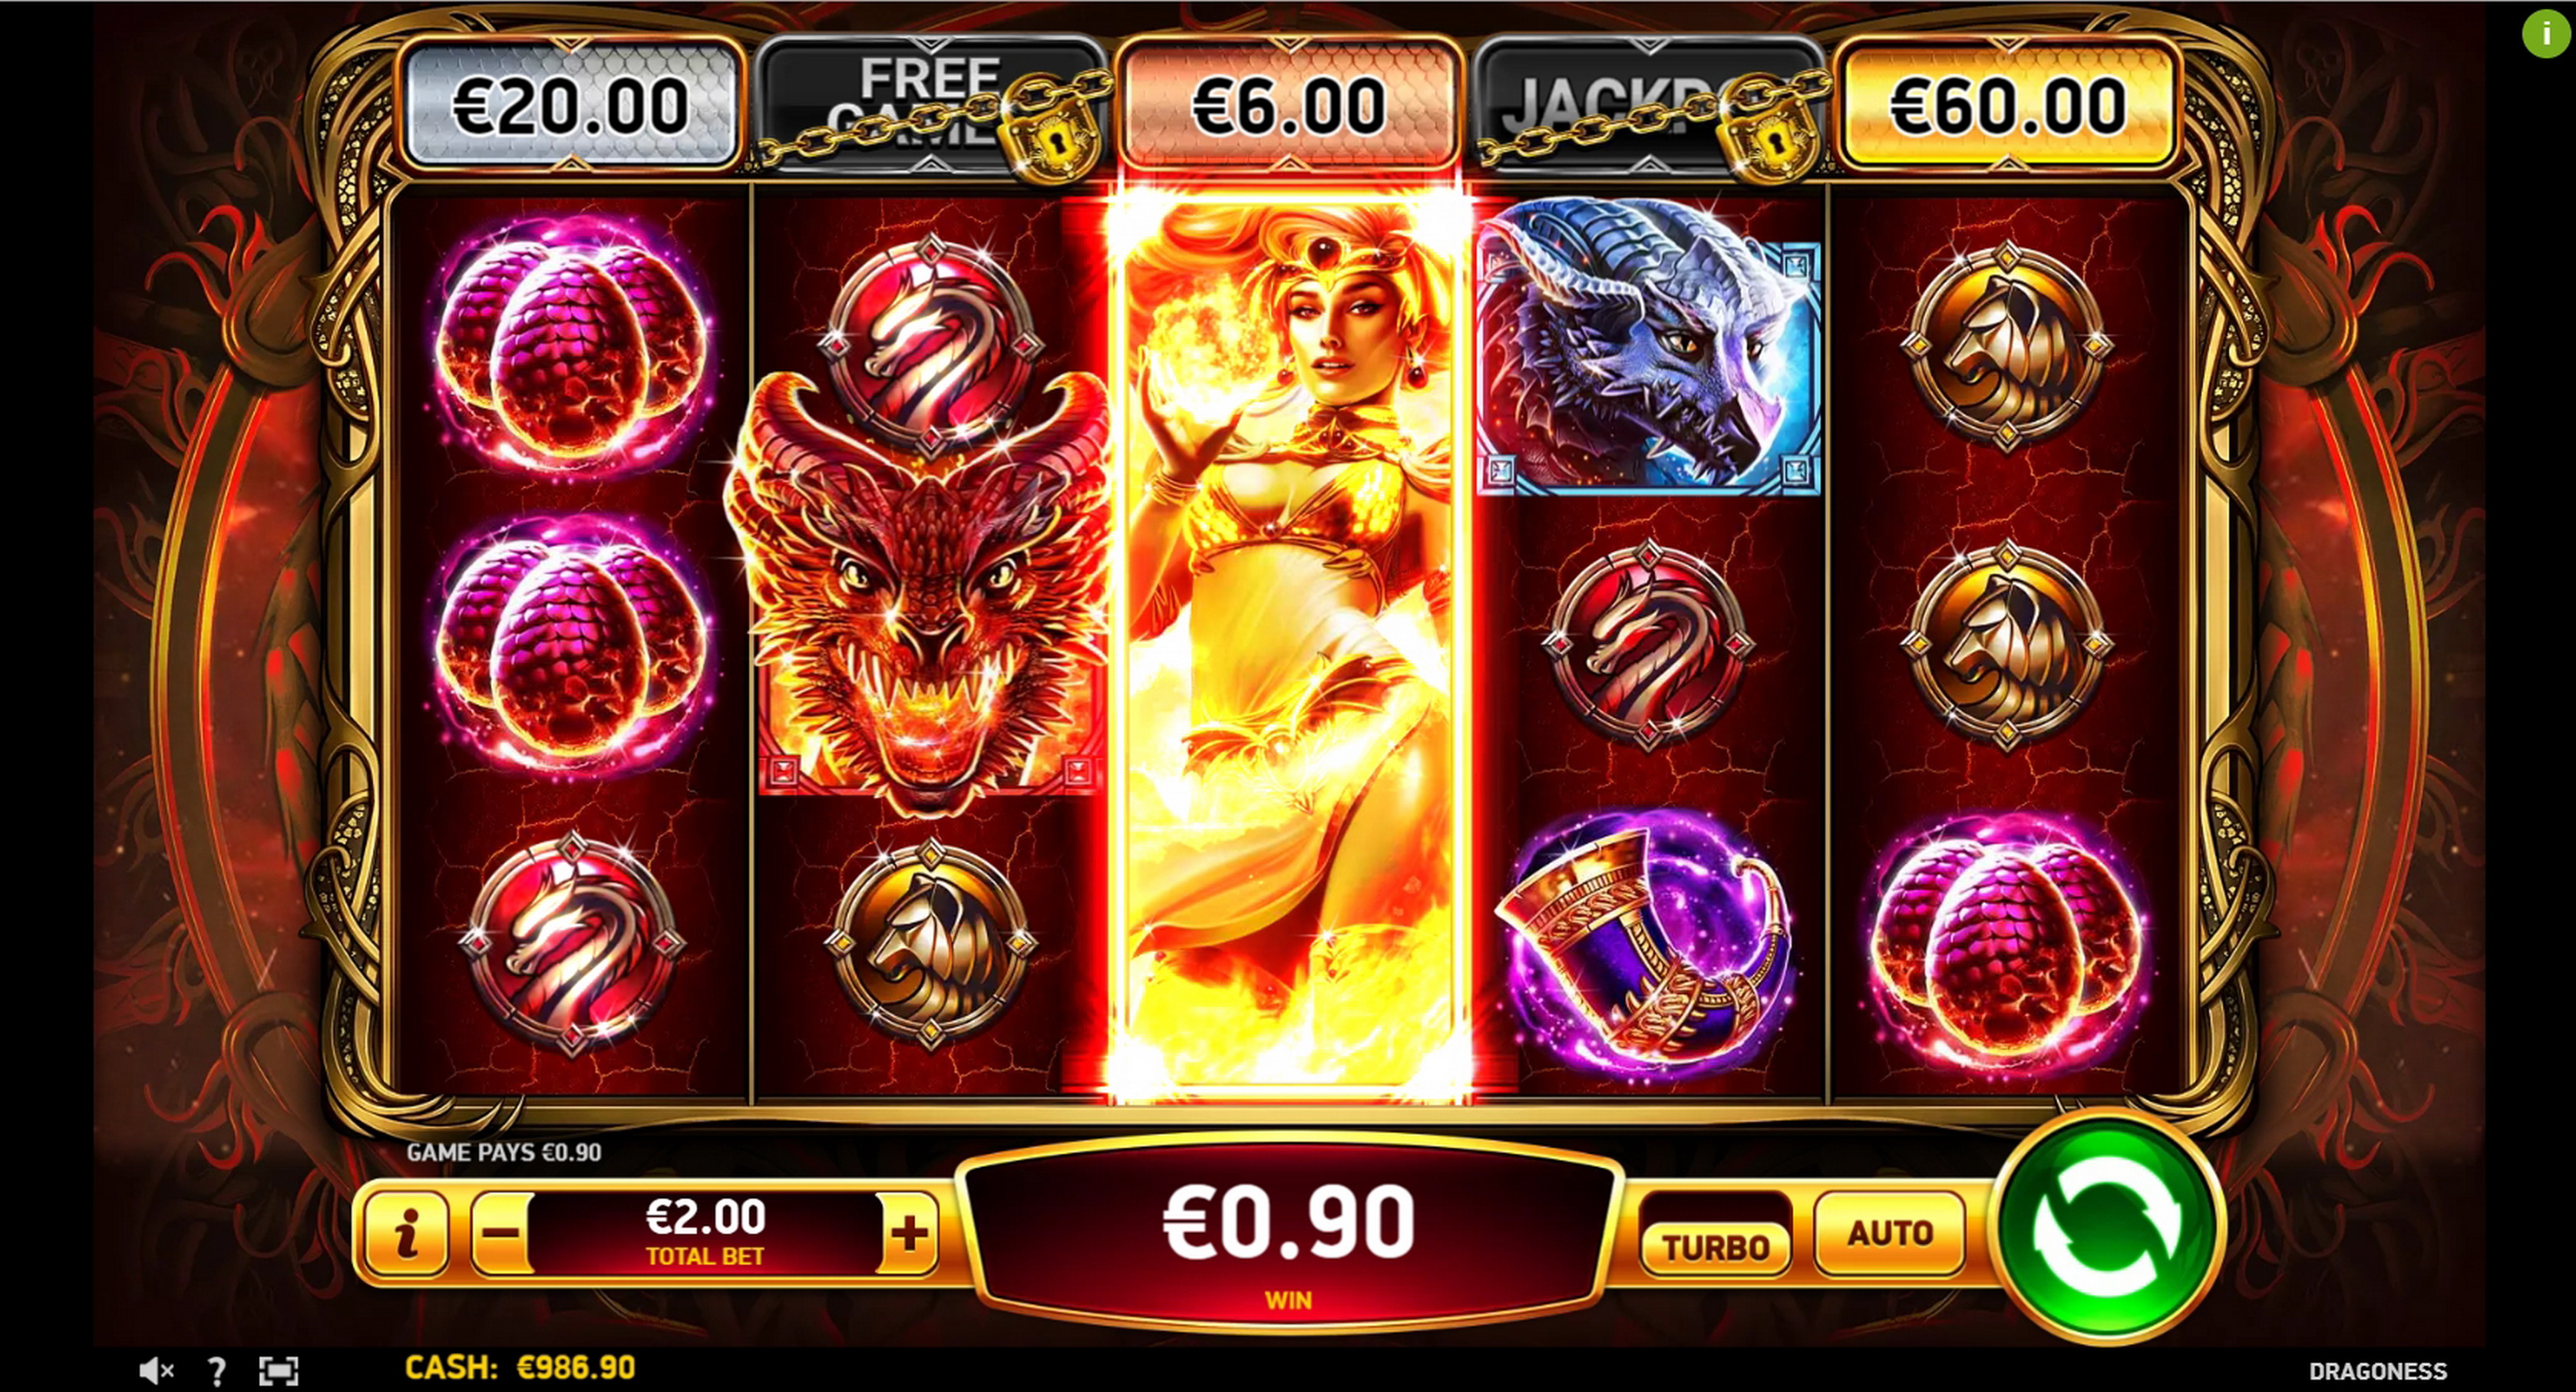 Win Money in Dragoness Free Slot Game by Ruby Play